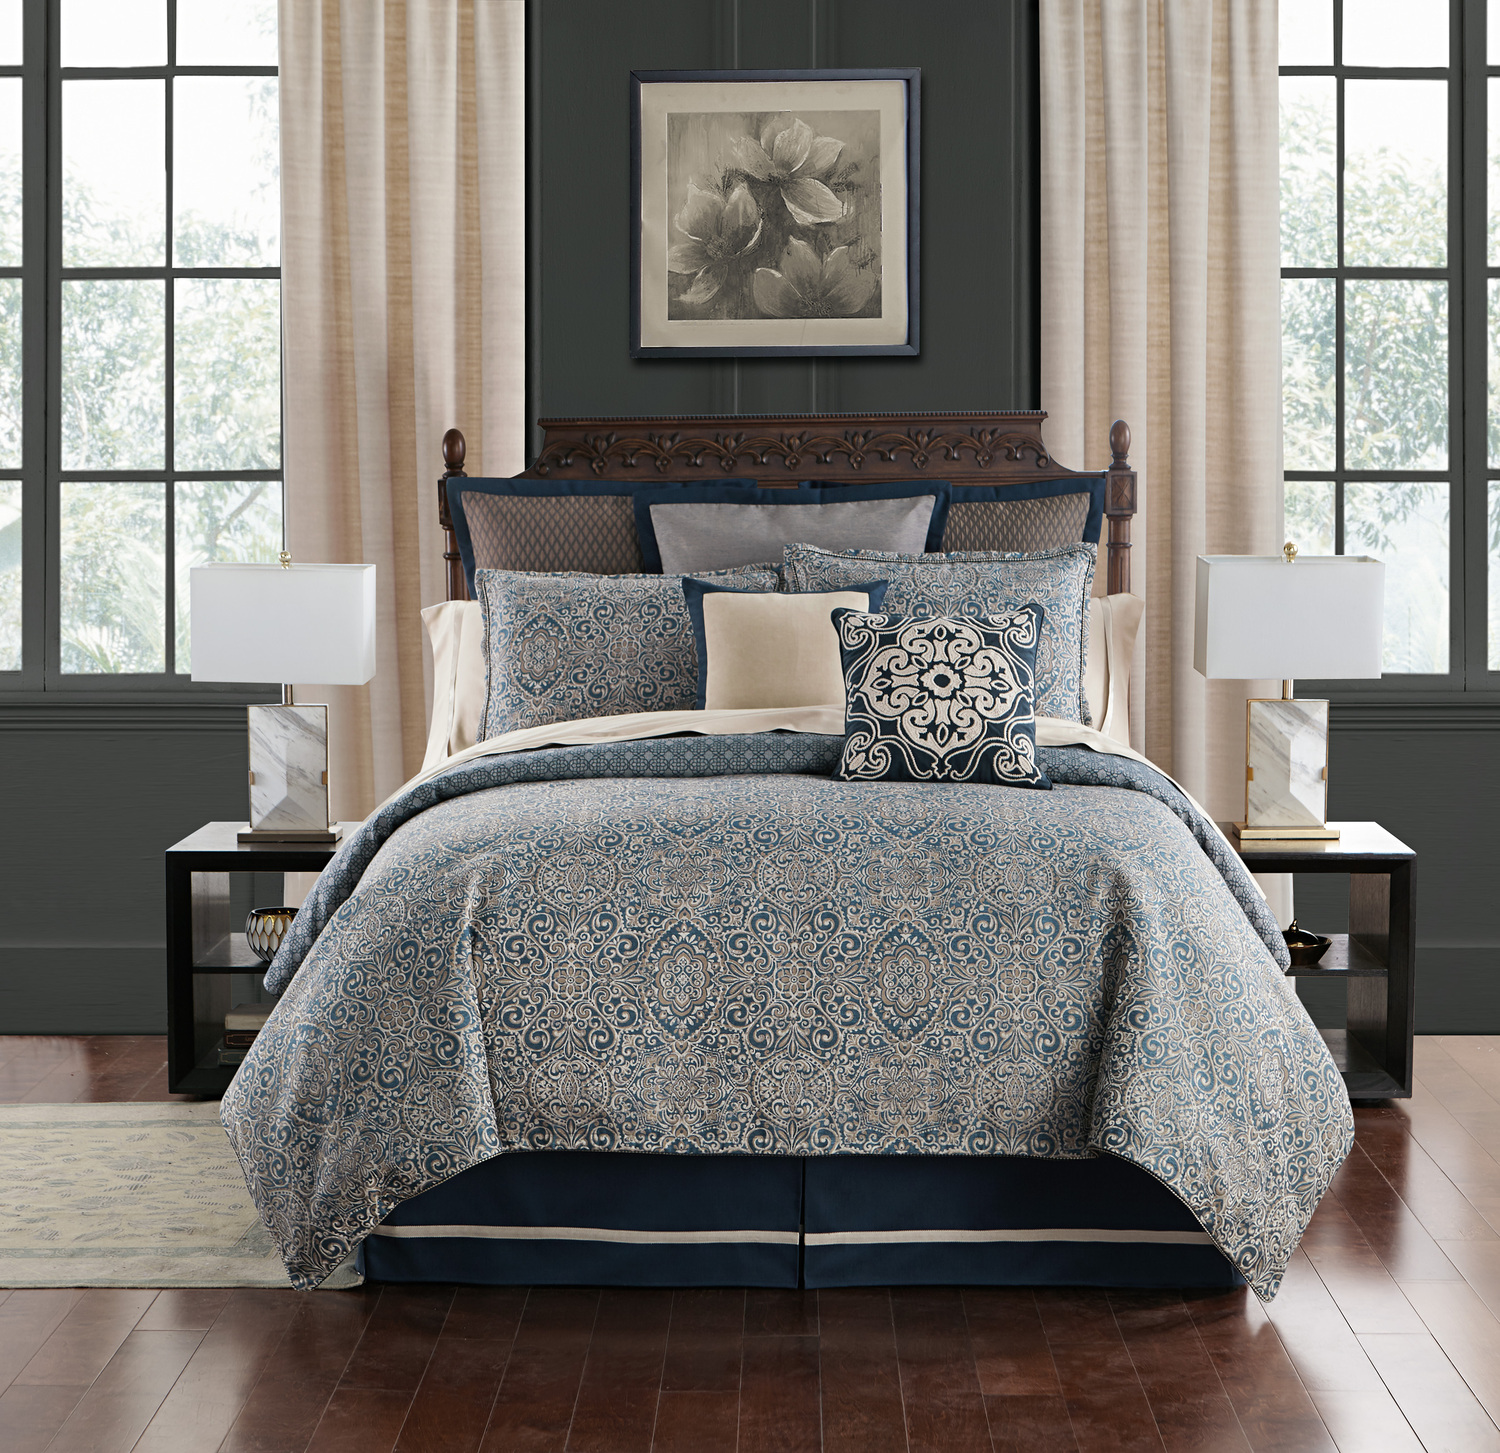 waterford asher comforter se